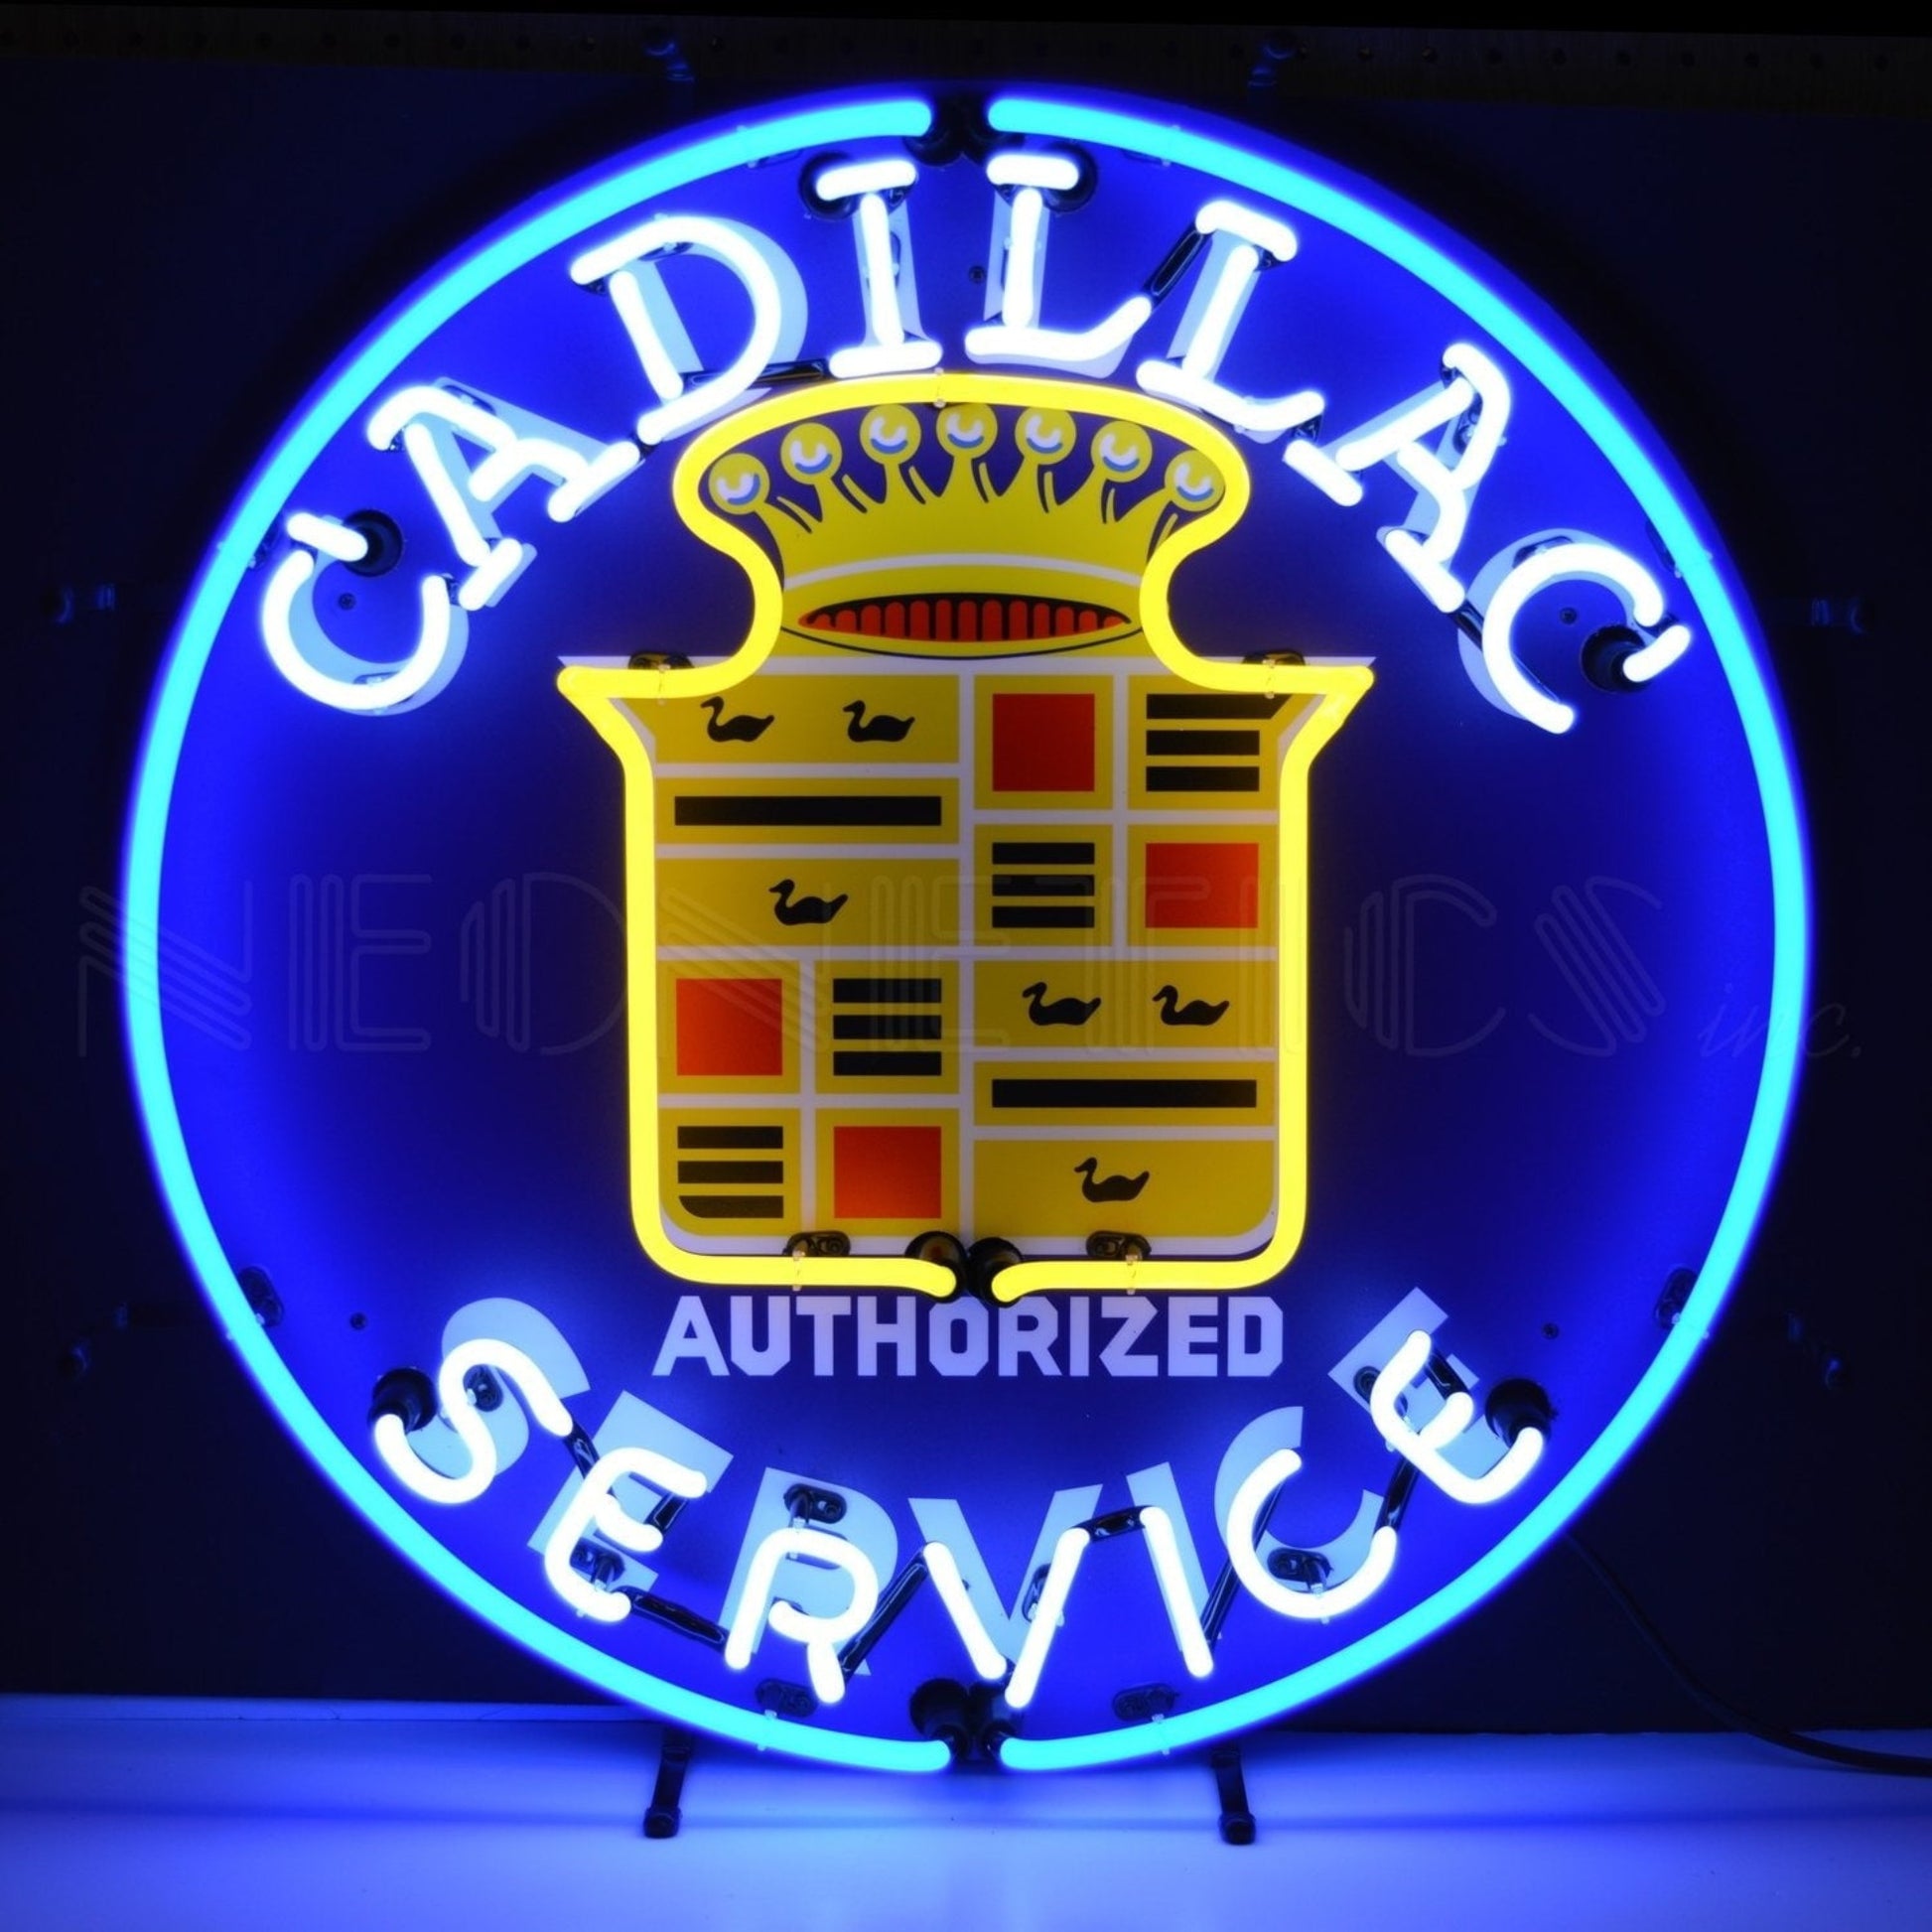 "Cadillac Authorized Service" neon sign with classic crest and crown emblem.